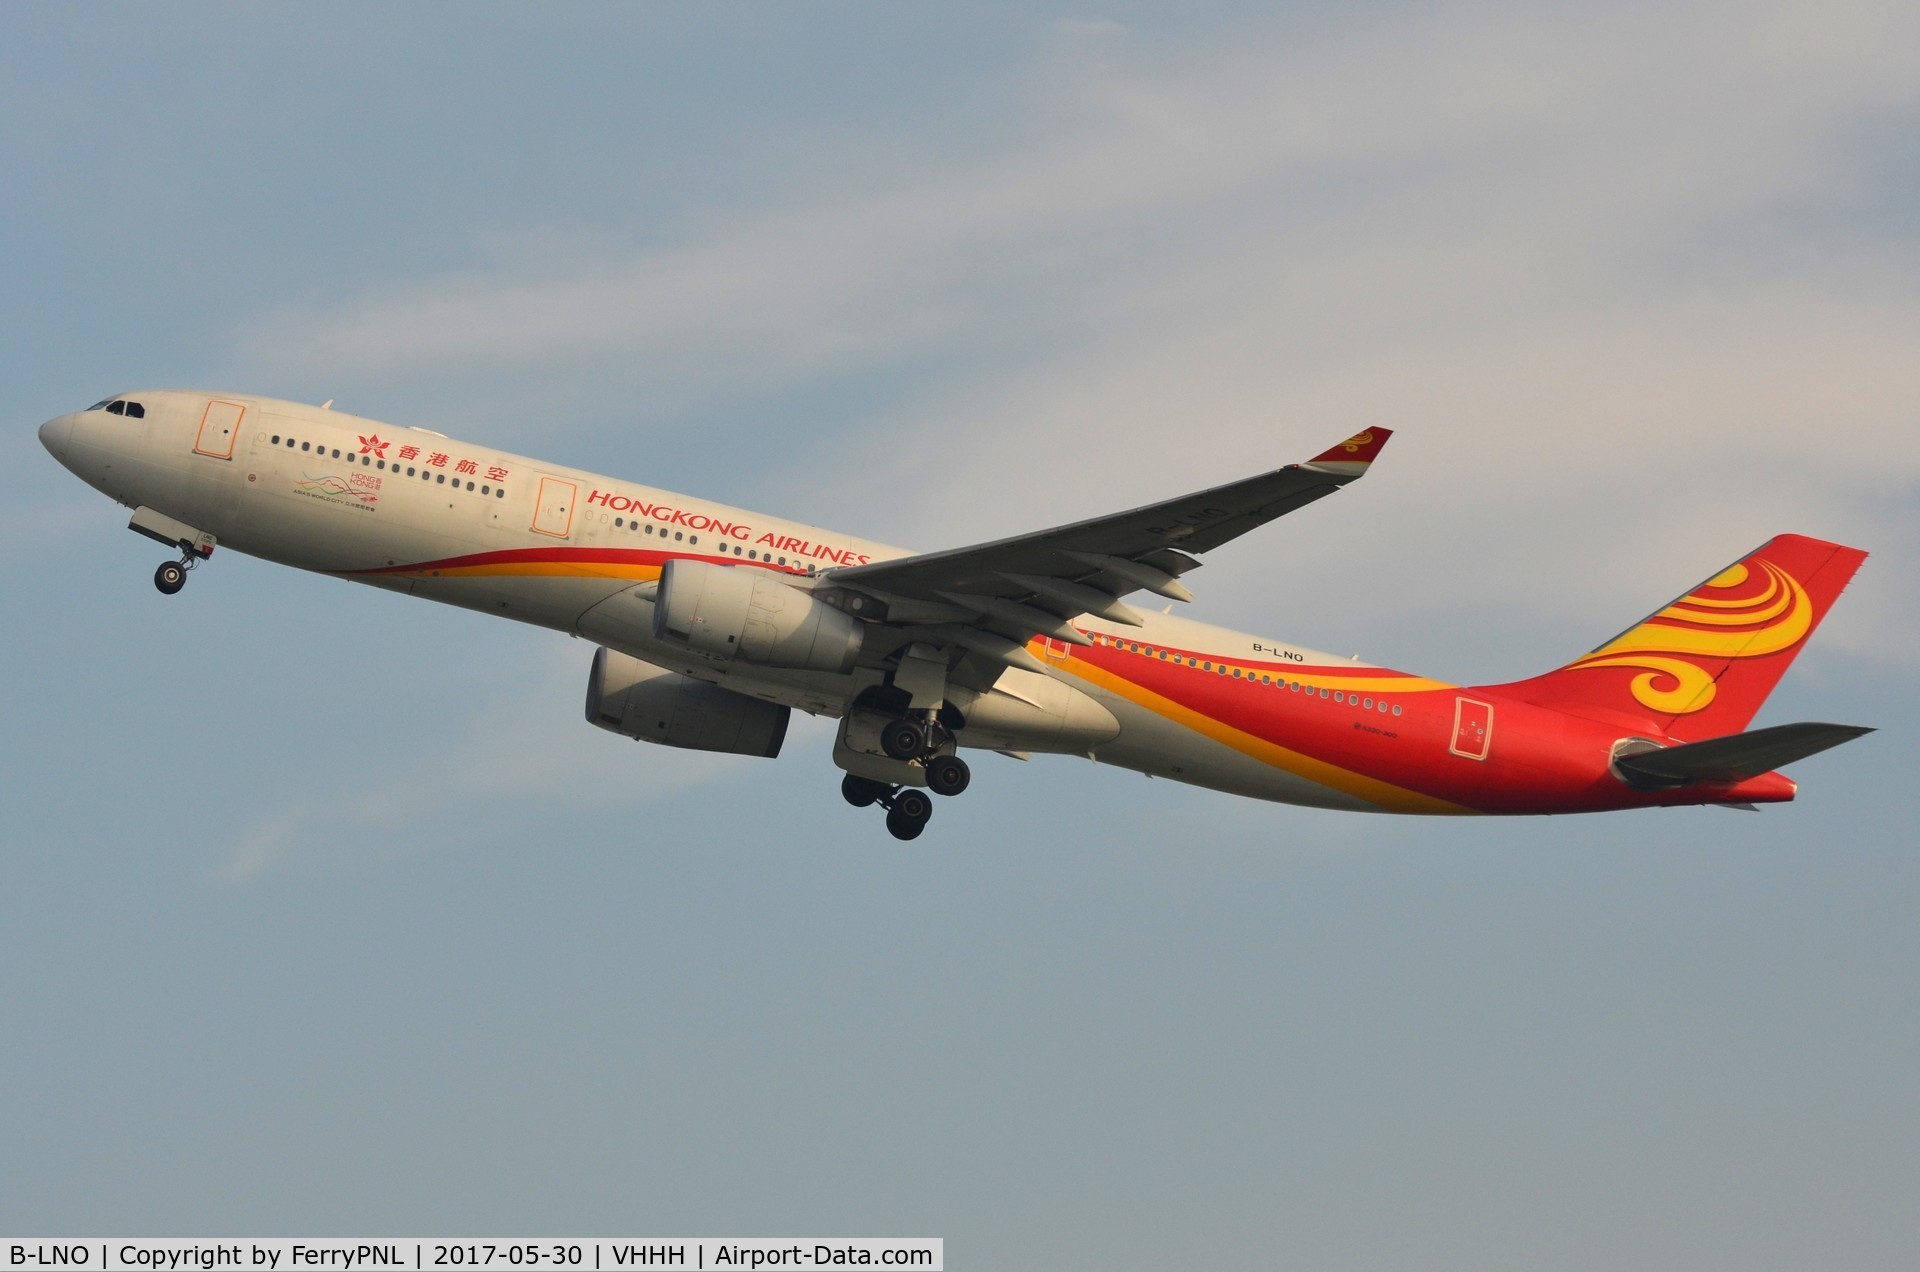 B-LNO, 2012 Airbus A330-343X C/N 1384, Departure of Hong Kong Airlines A333